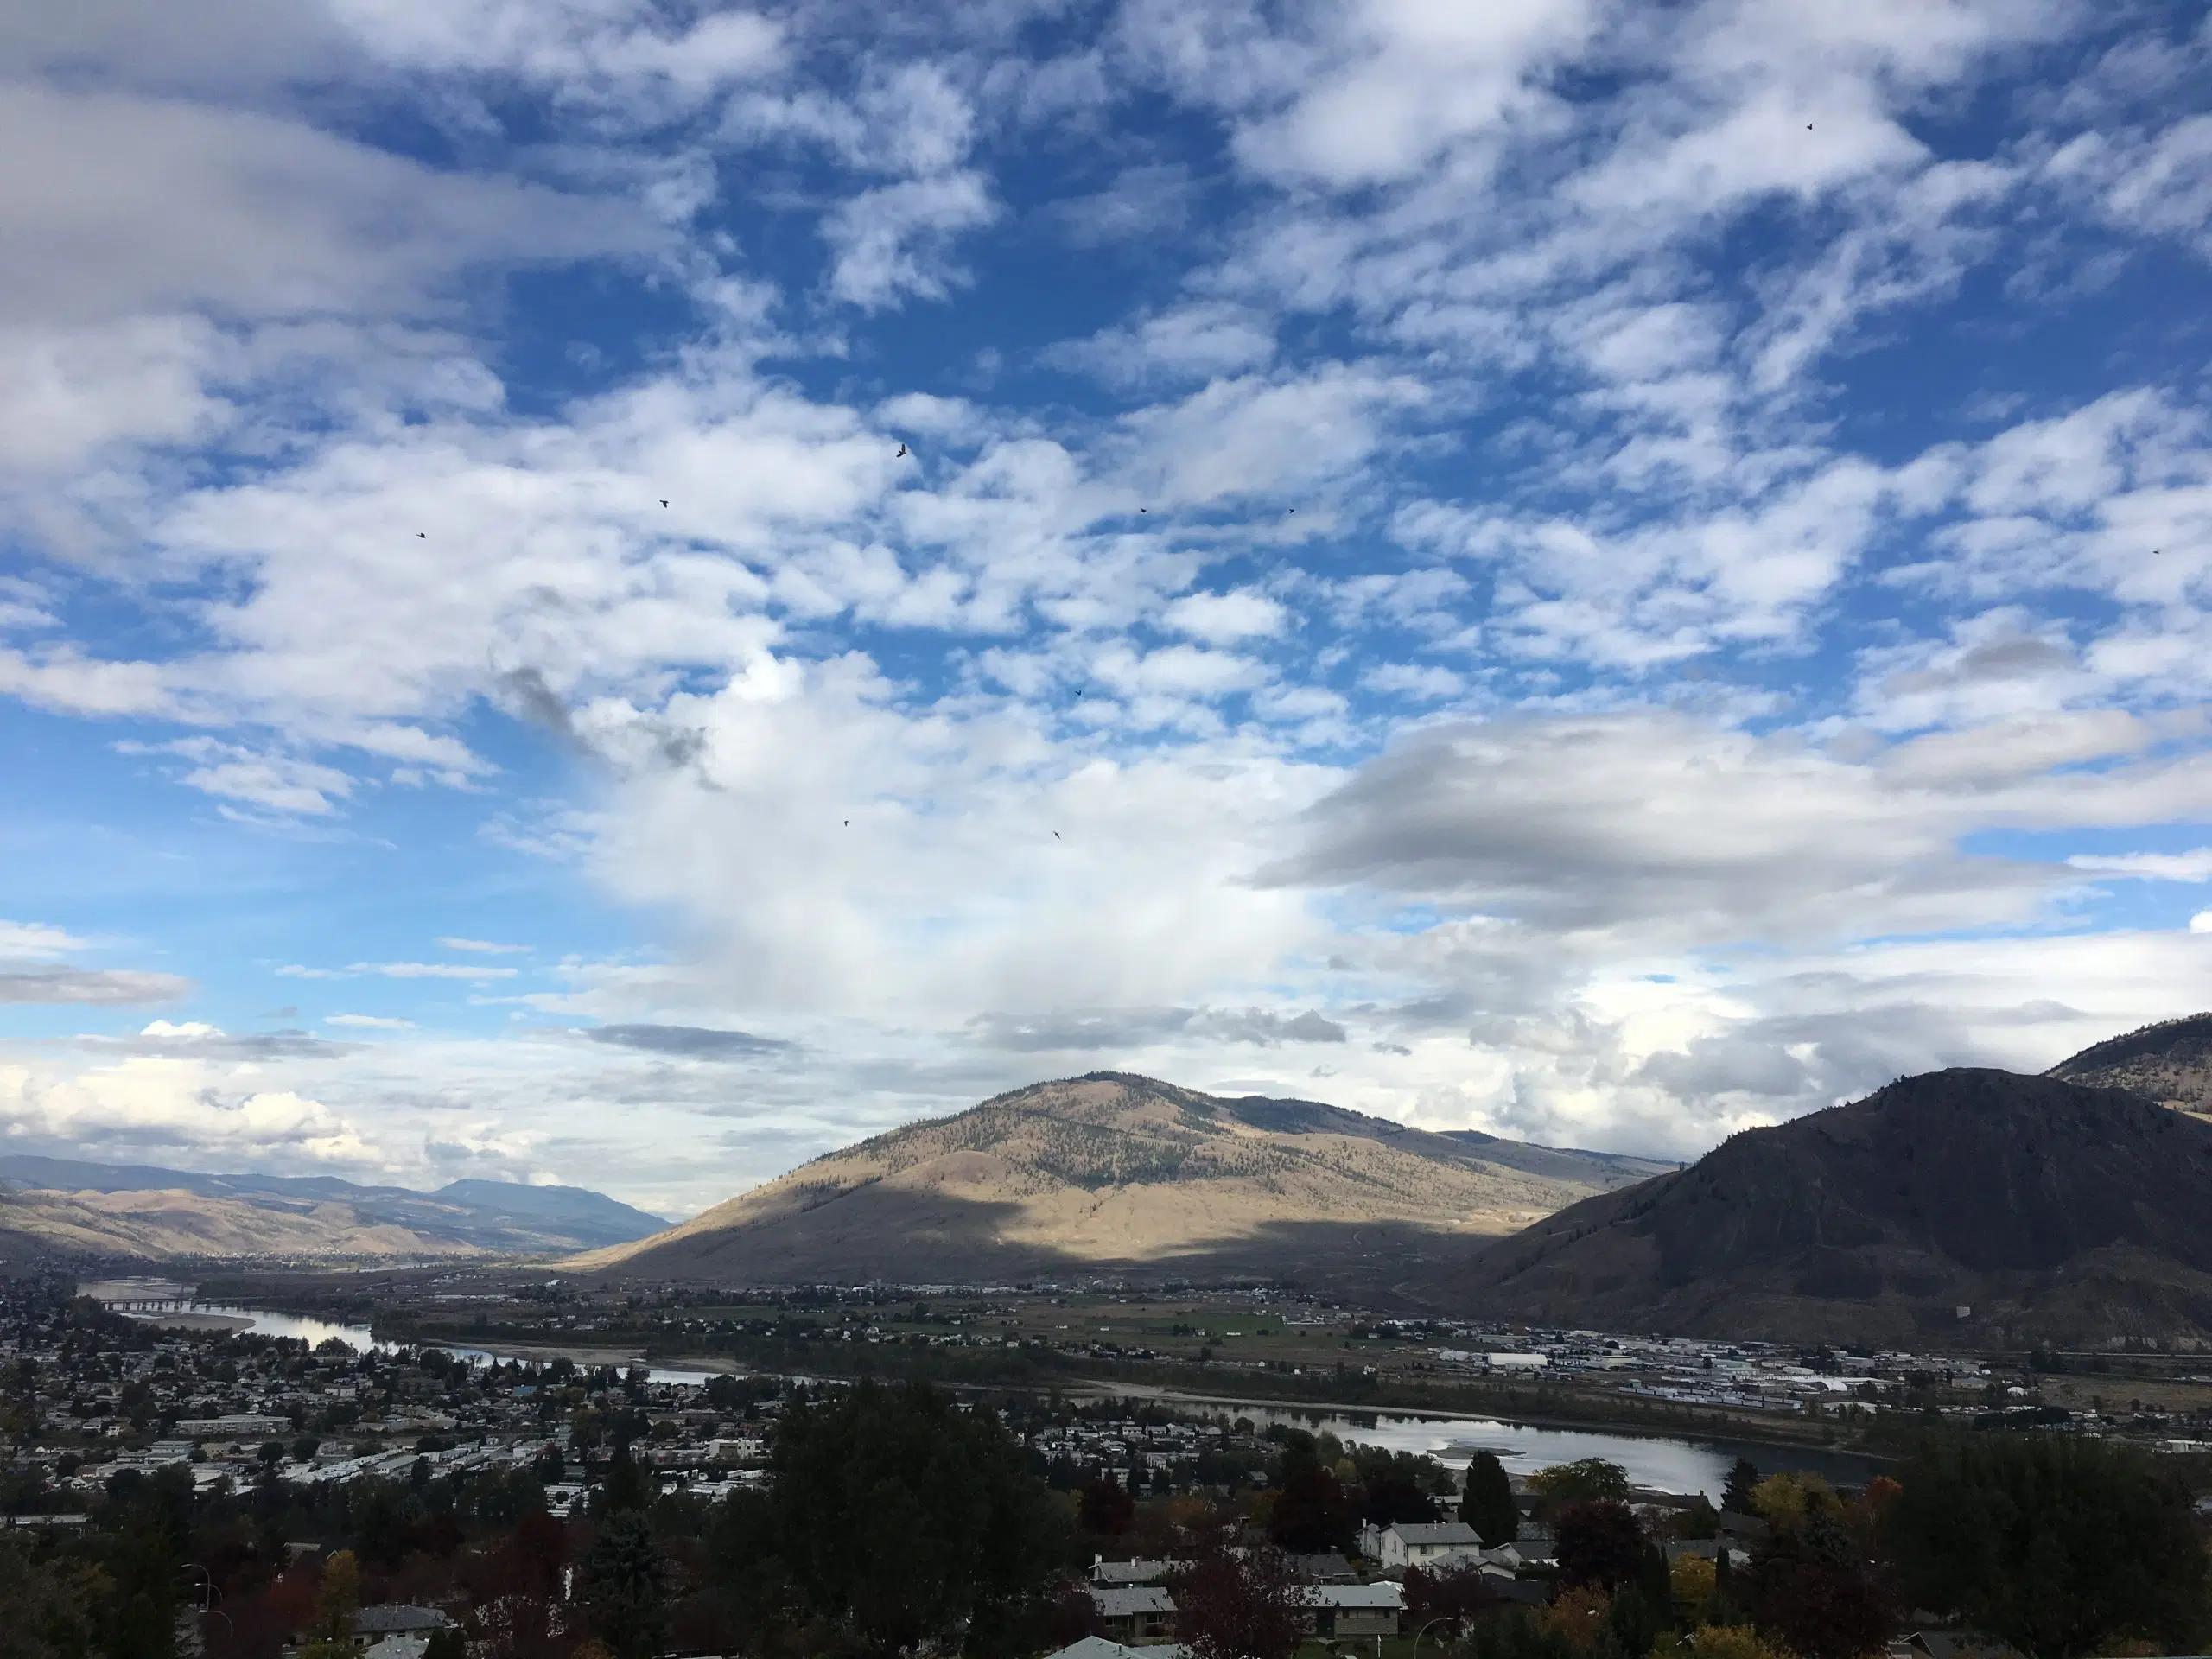 So far it looks like the Kamloops area may dodge the flooding bullet 